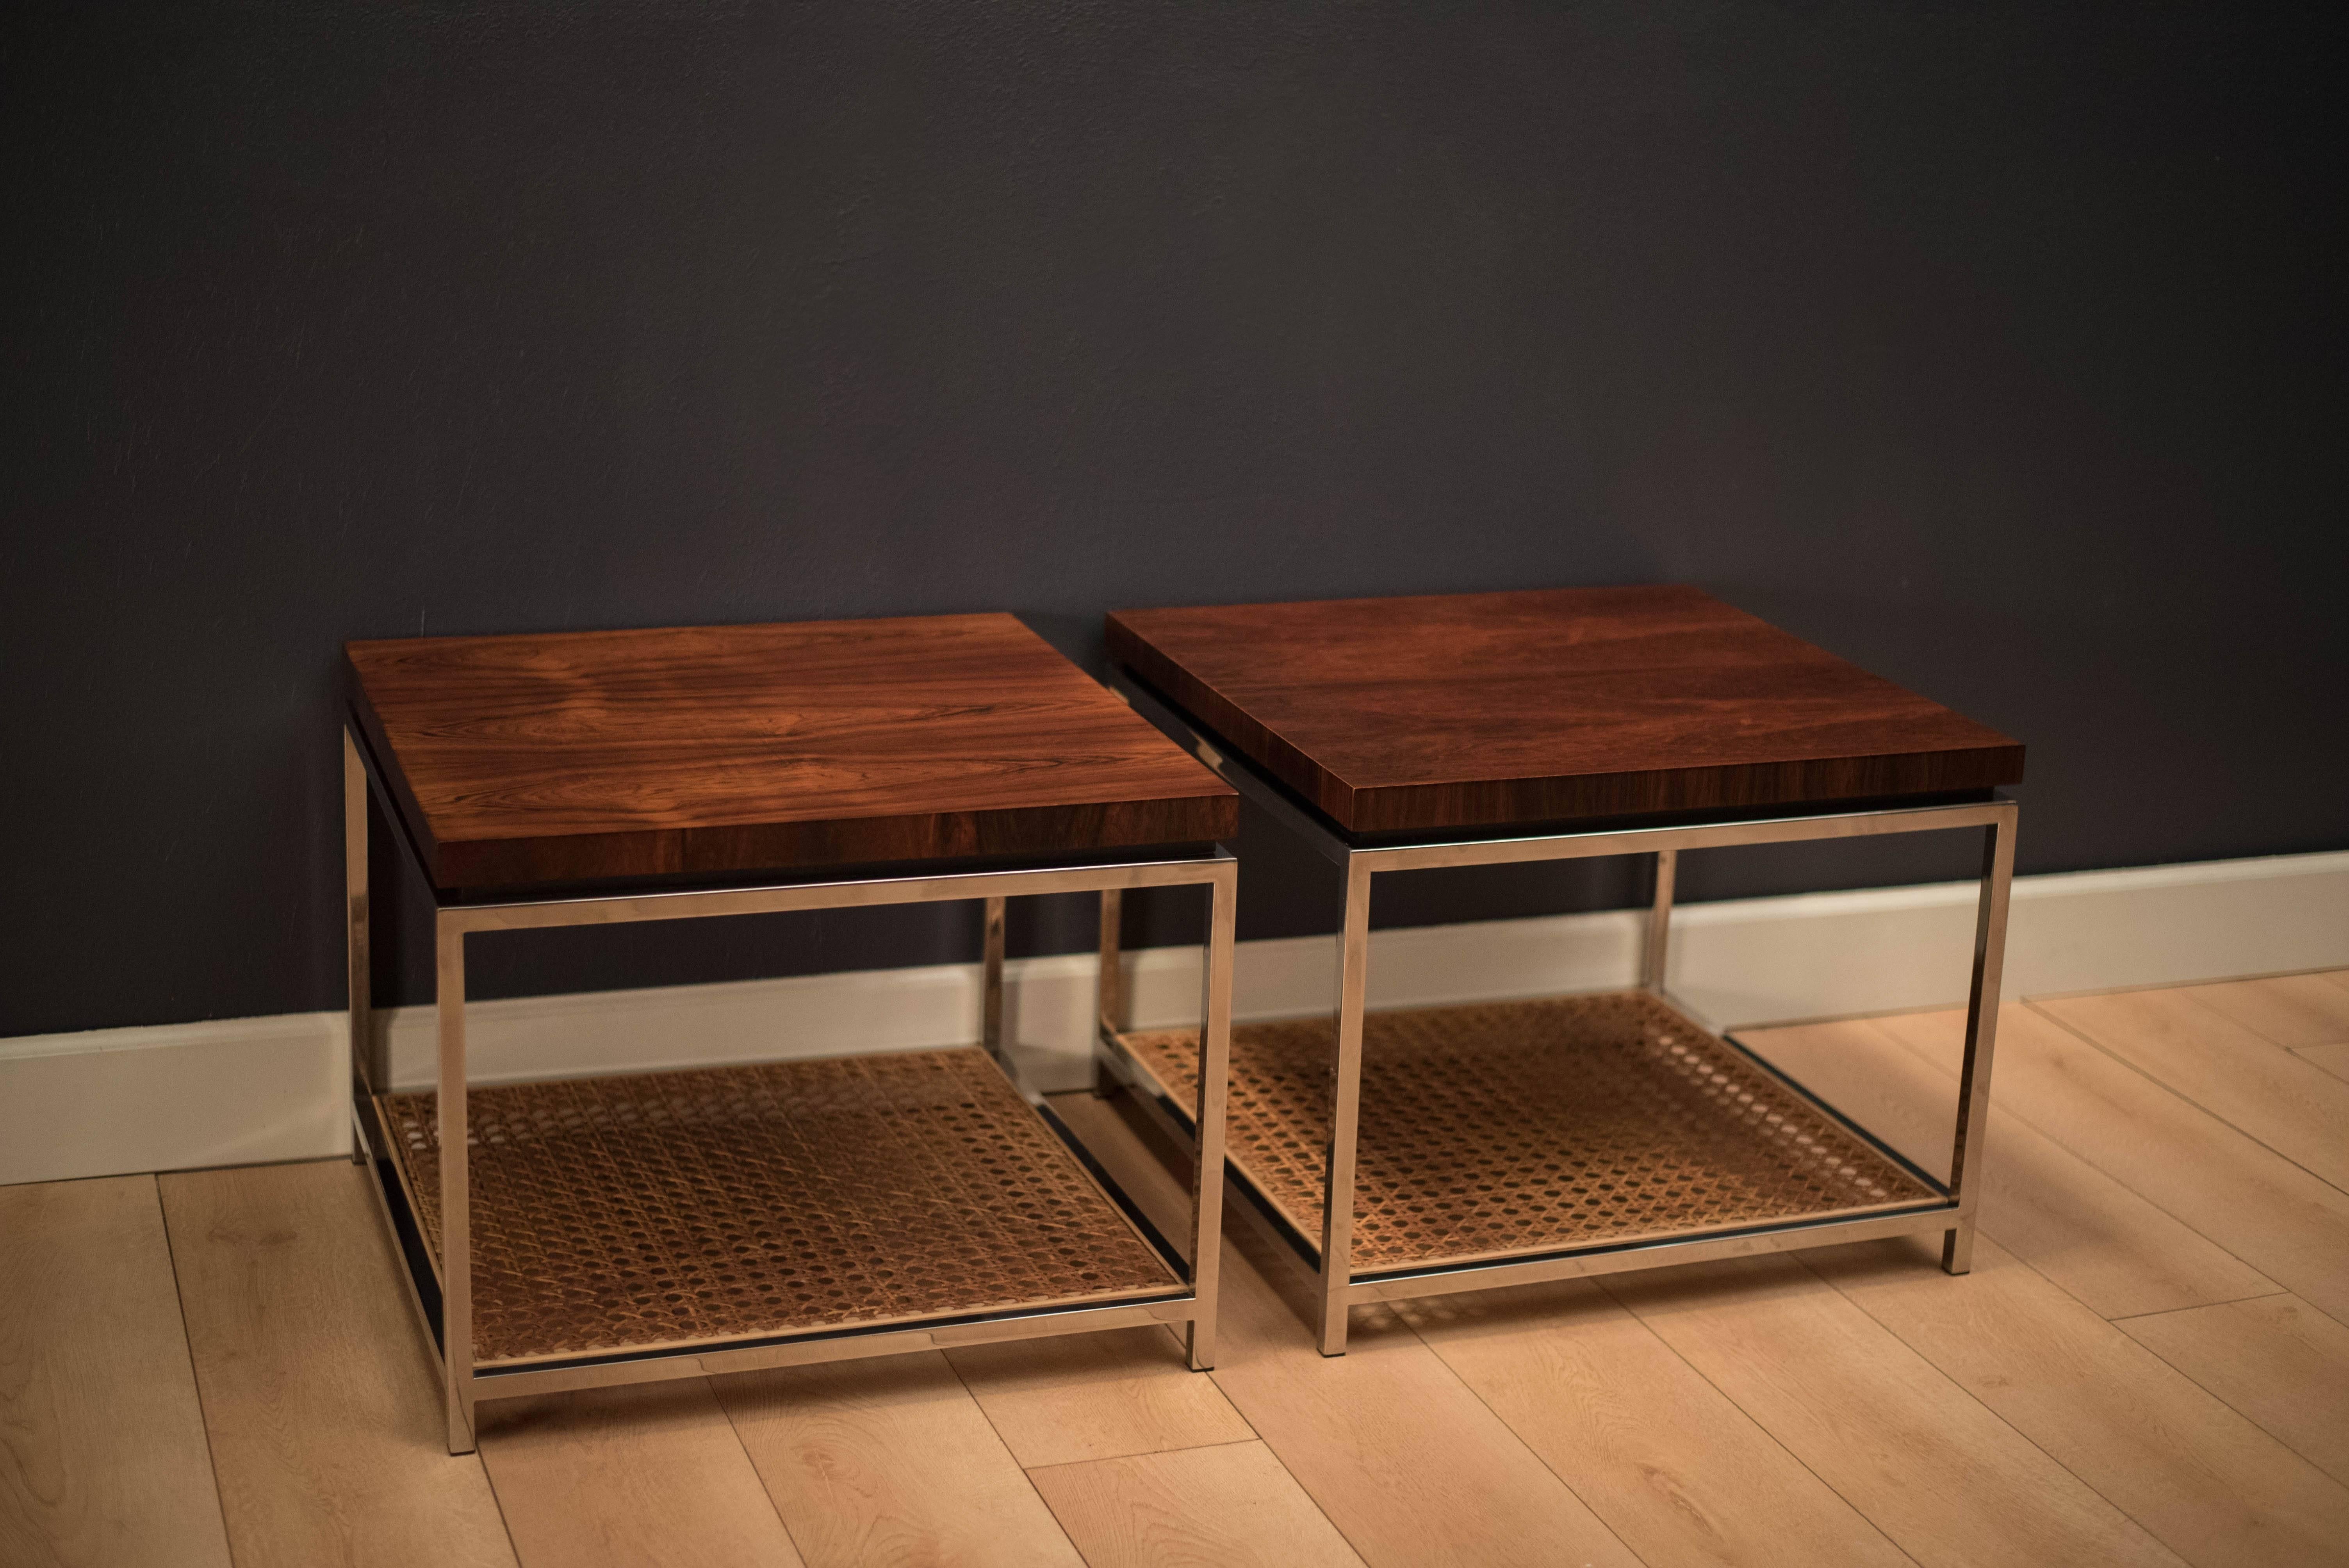 Mid-century modern pair of square side tables in rosewood and chrome. Each table includes a lower tiered rattan shelf. Continuous rosewood grain is displayed at every angle.